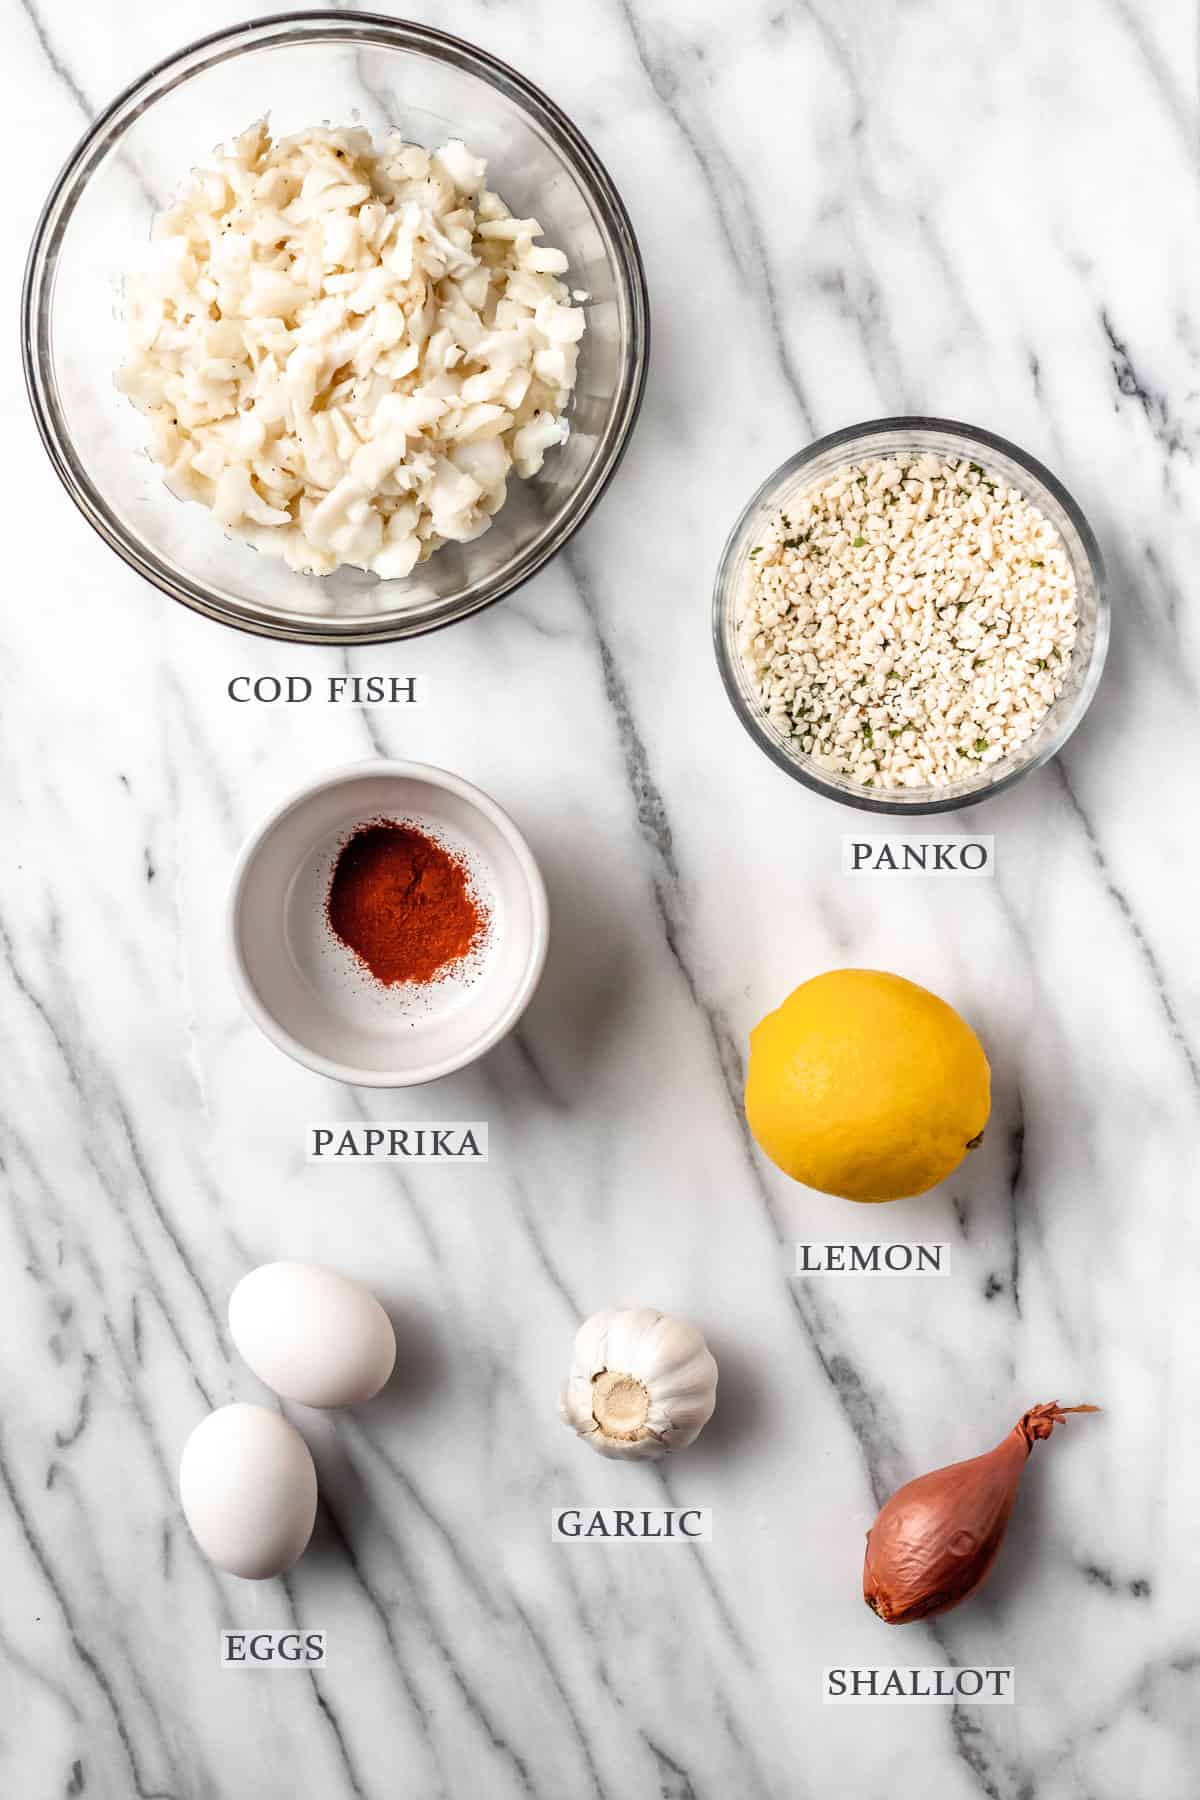 Ingredients needed to make cod cakes with text overlay.